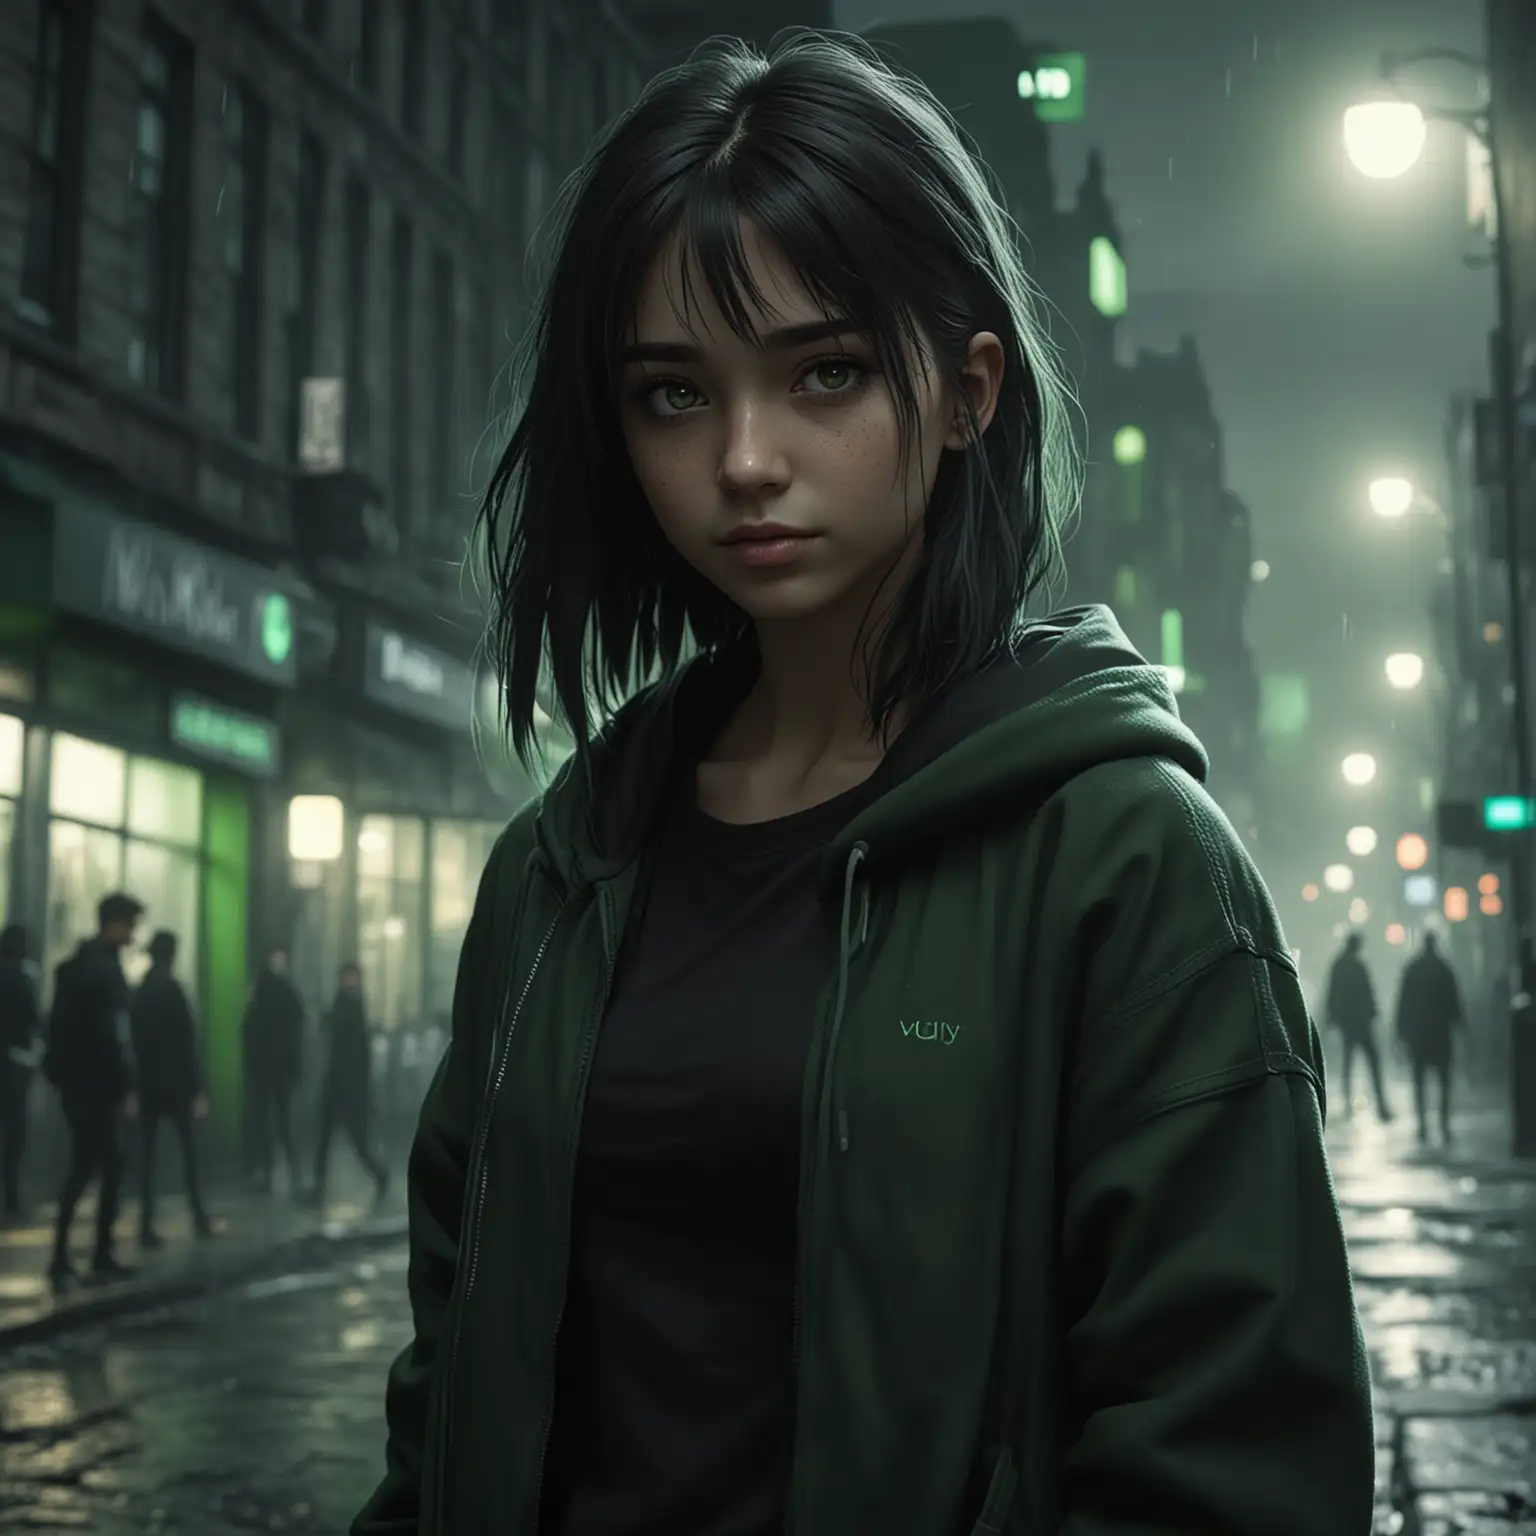 Mysterious Urban Avenger in Stylish Black and Green Attire amidst Nighttime Cityscape